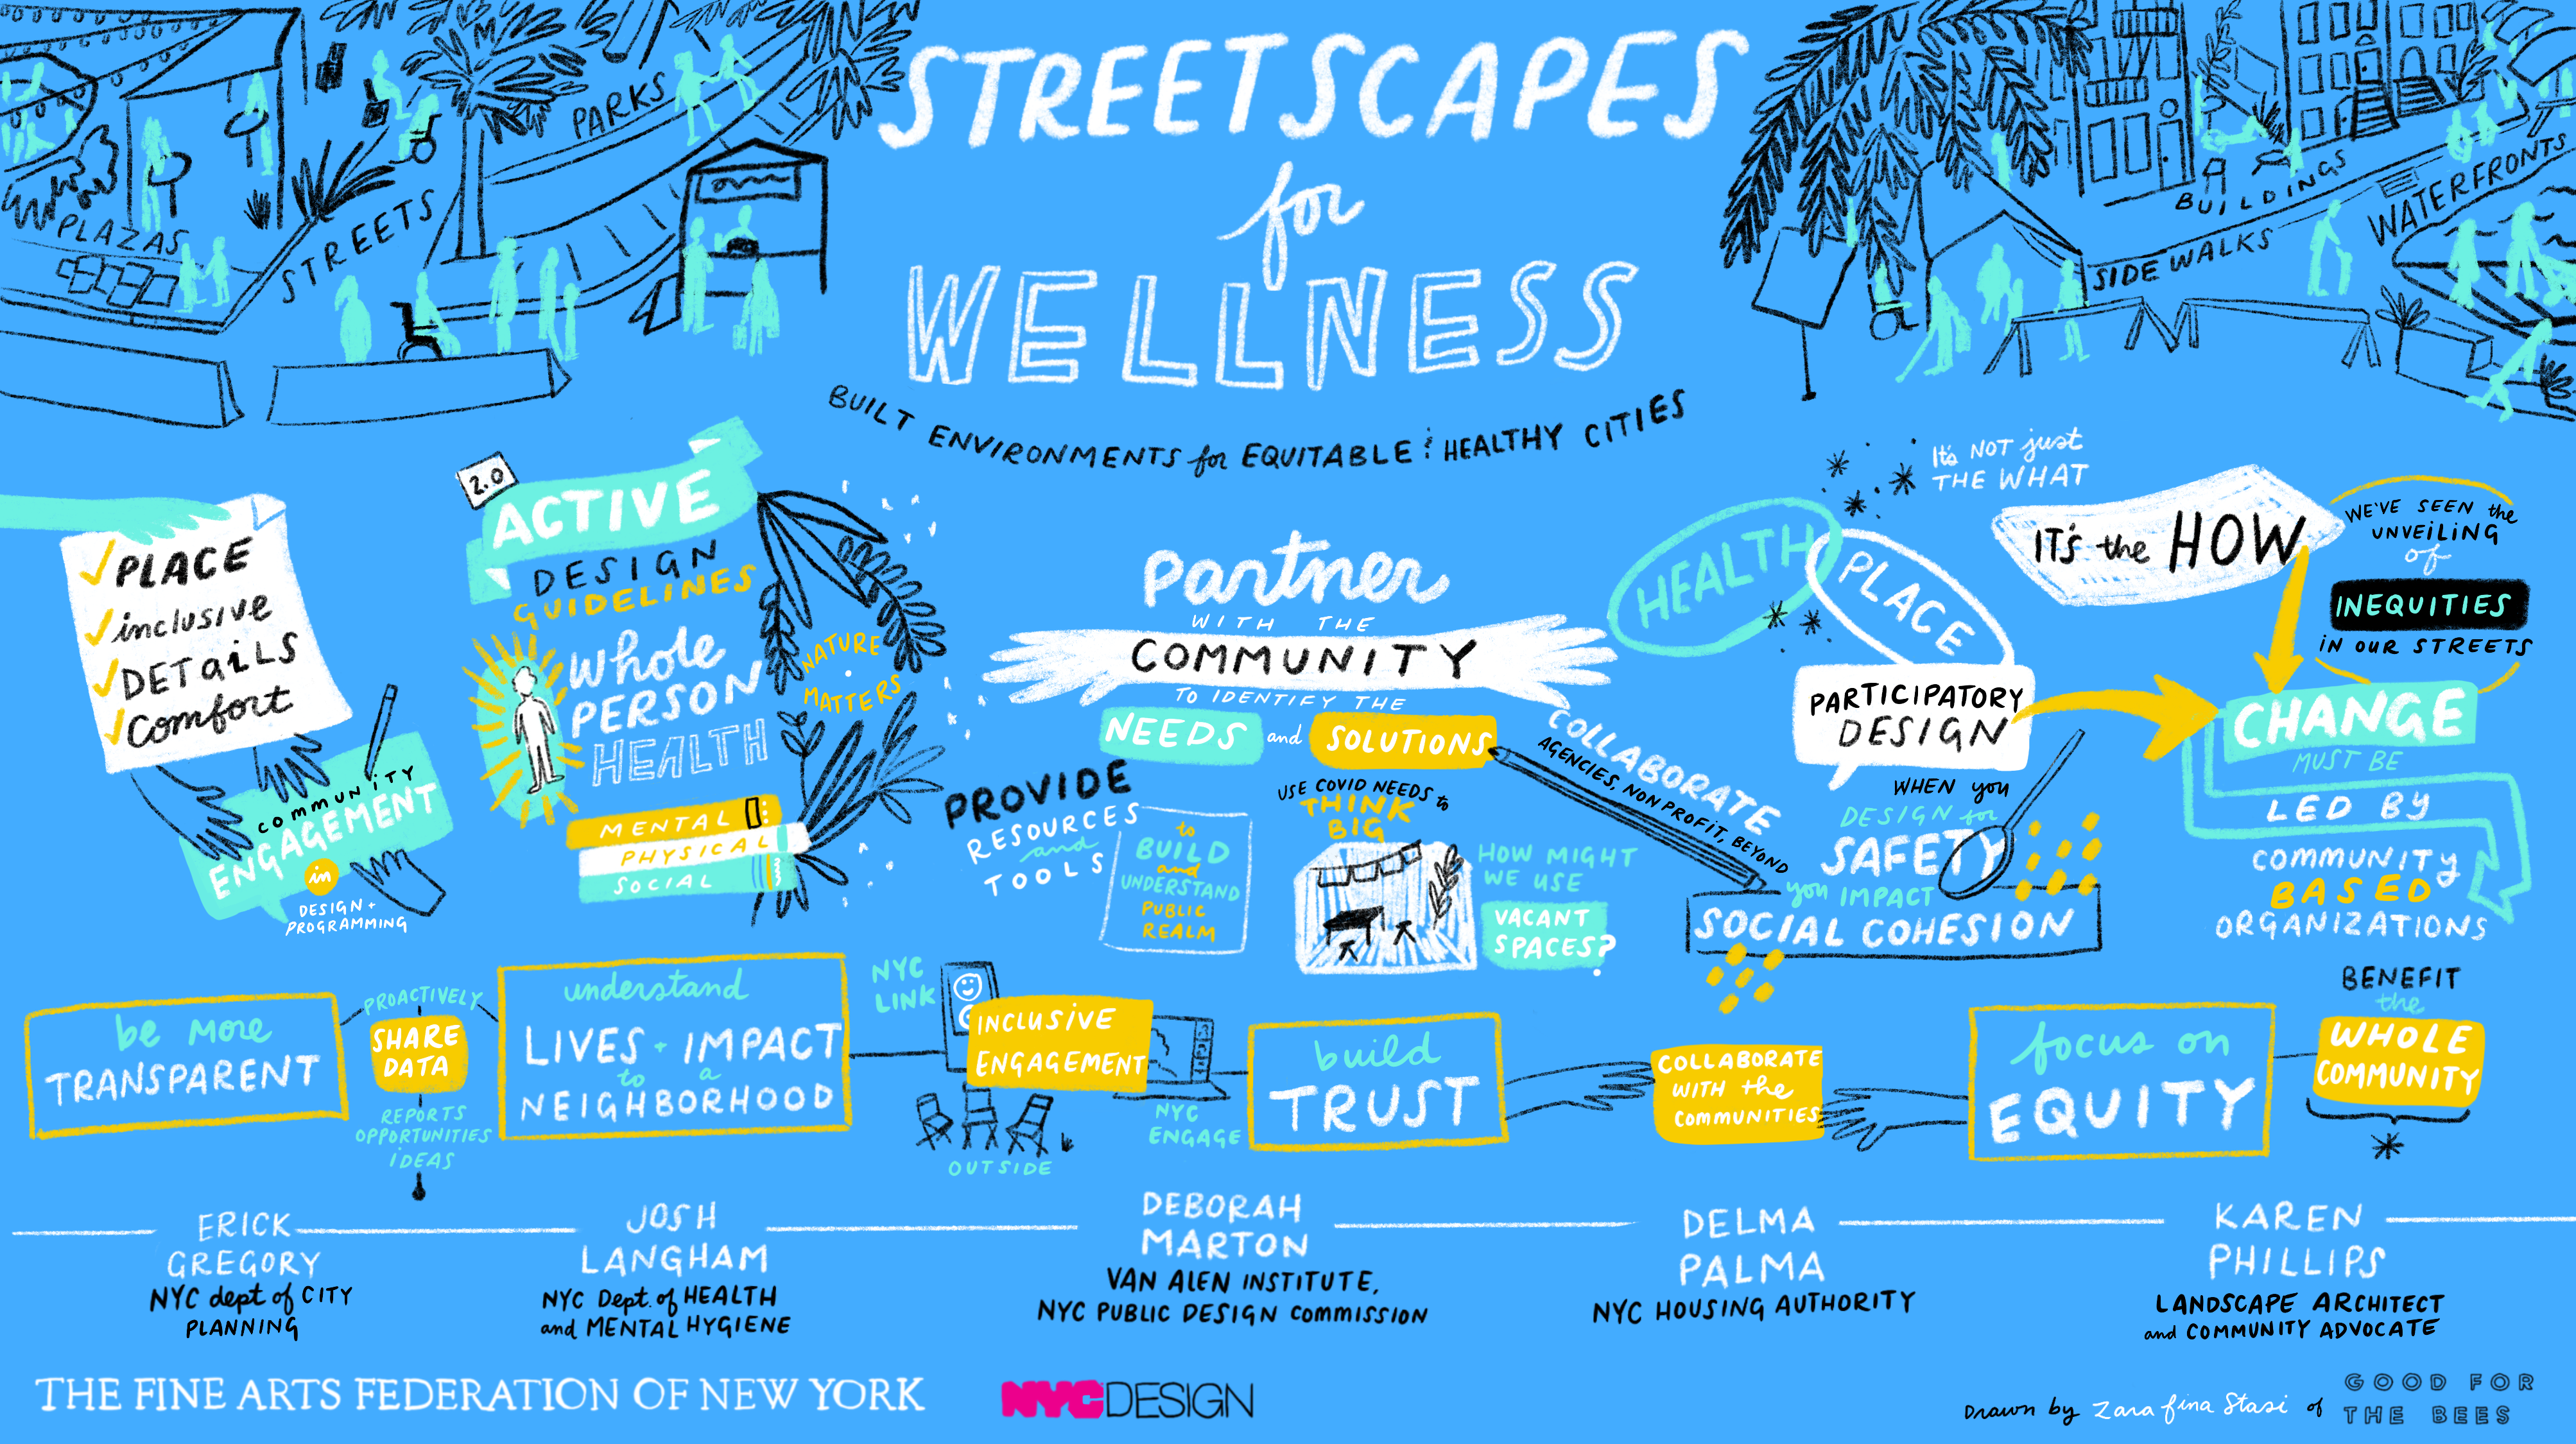 Streetscapes for Wellness